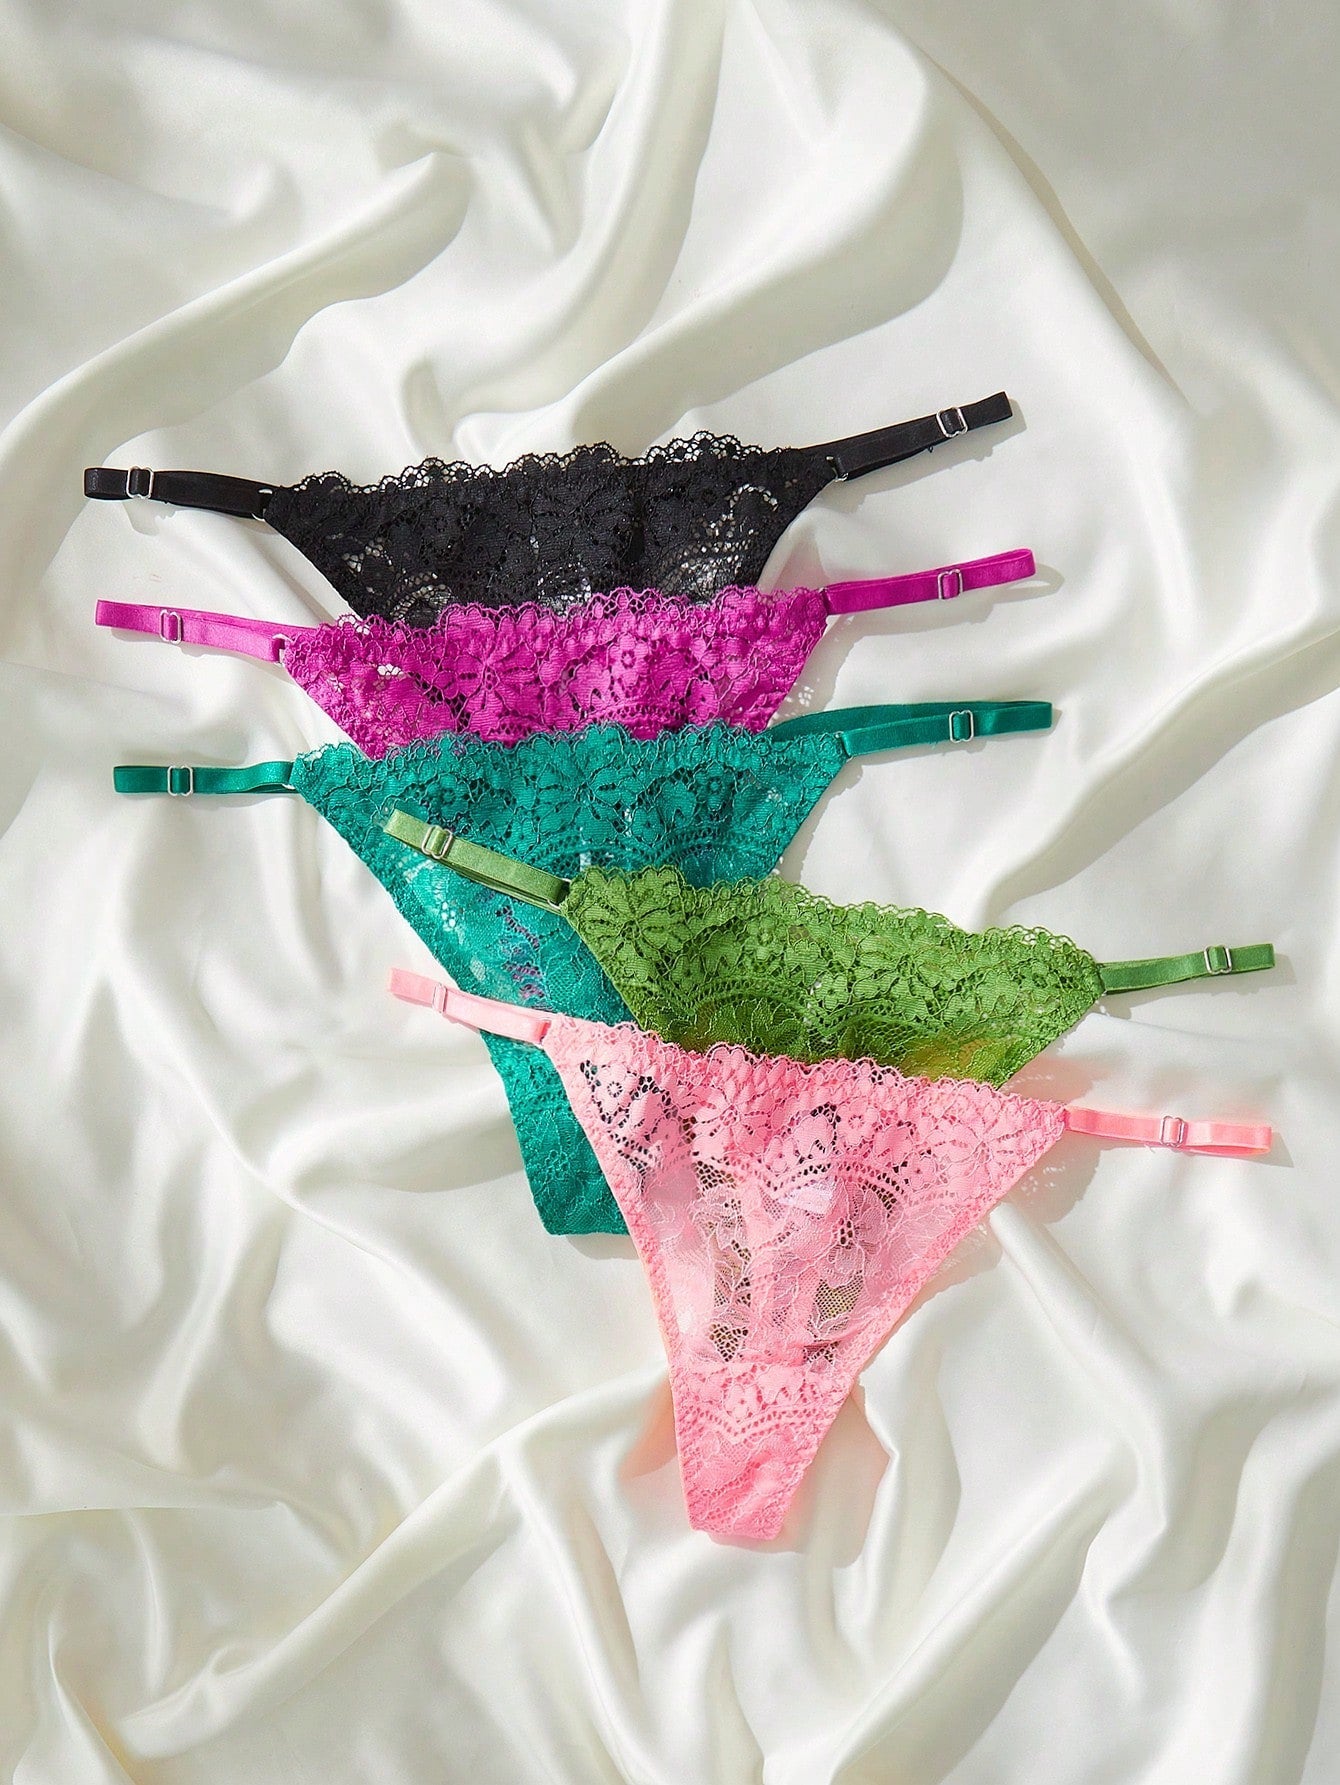 Is That The New 4pack Floral Lace Panty Set ??